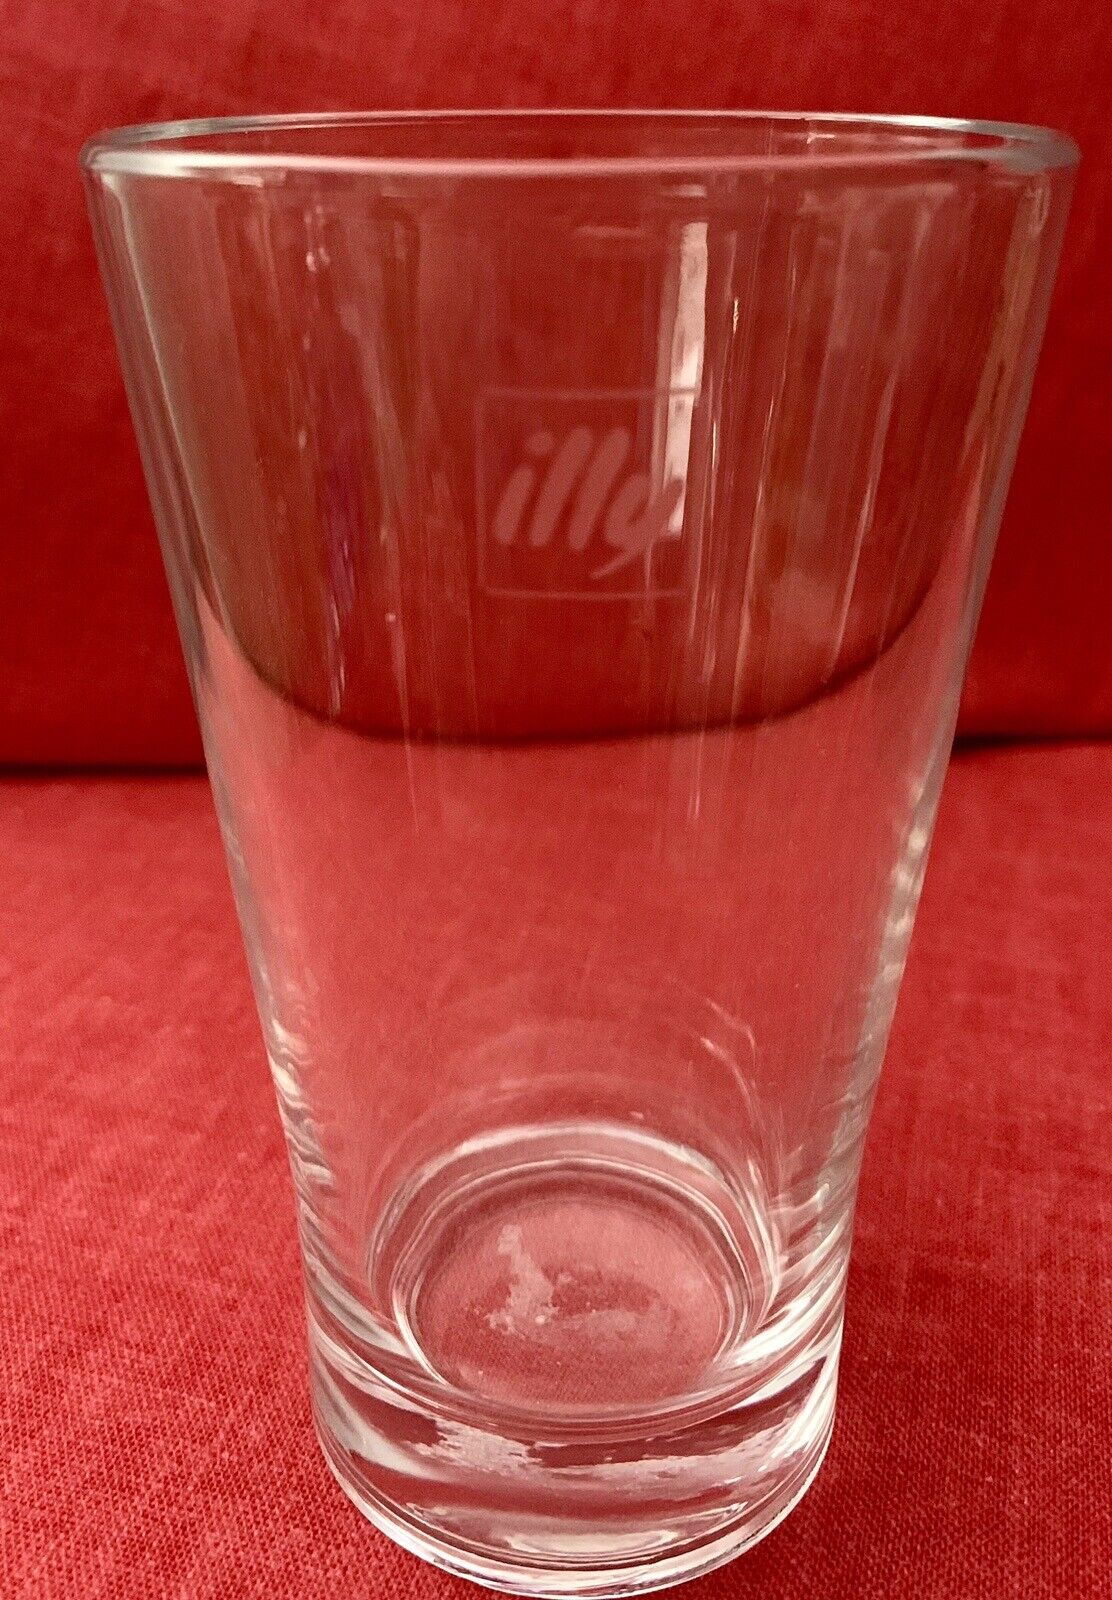 Illy Clear Coffee Latte Glass HARD TO FiND, GREAT CONDITION & COFFEE BAR PERFECT